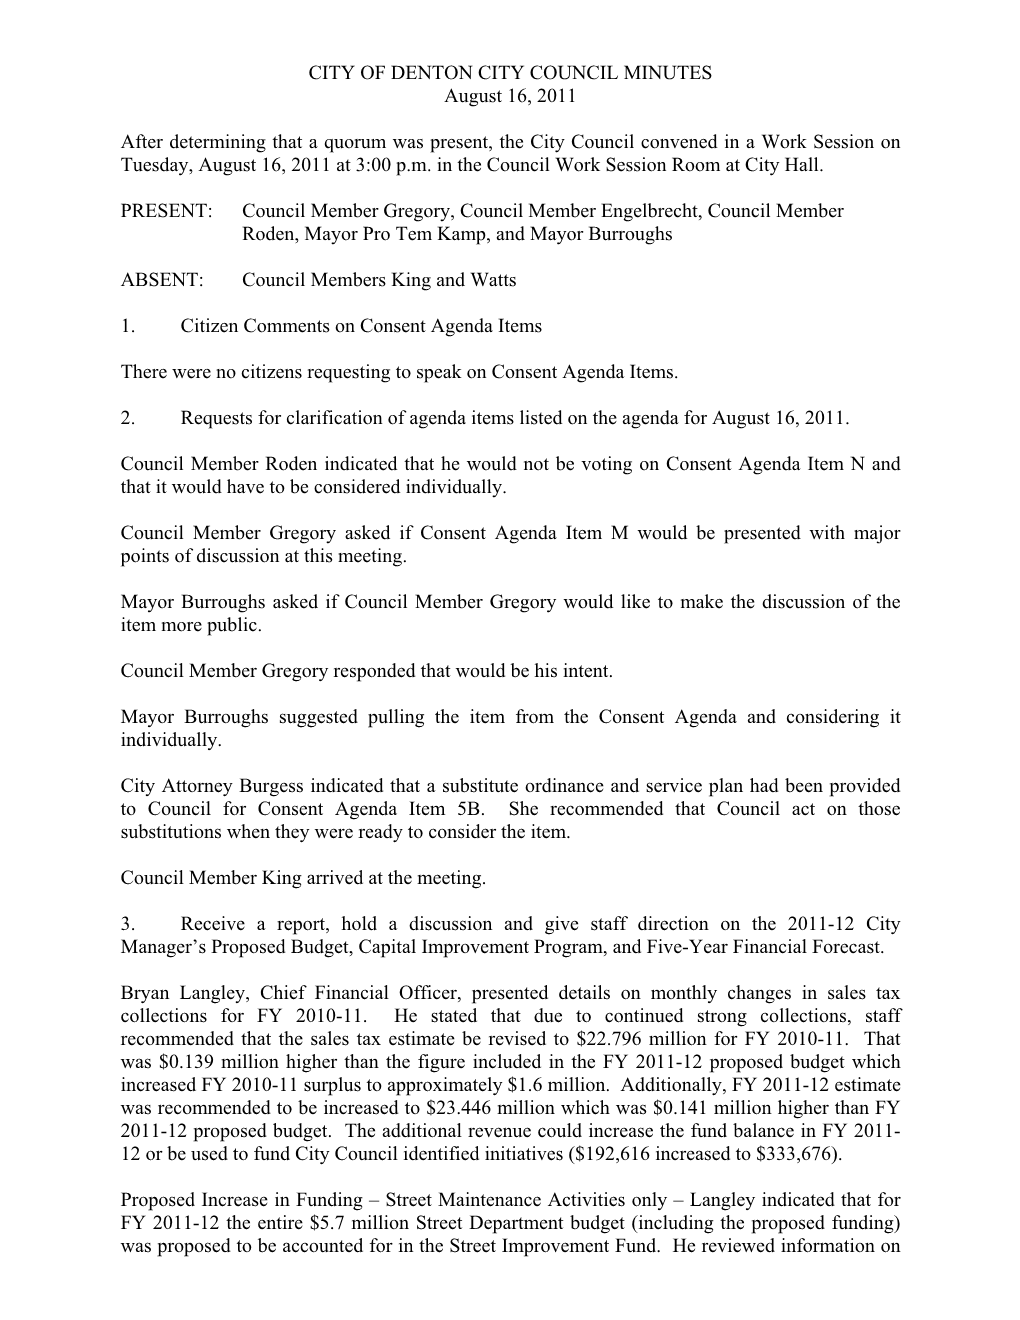 CITY of DENTON CITY COUNCIL MINUTES August 16, 2011 After